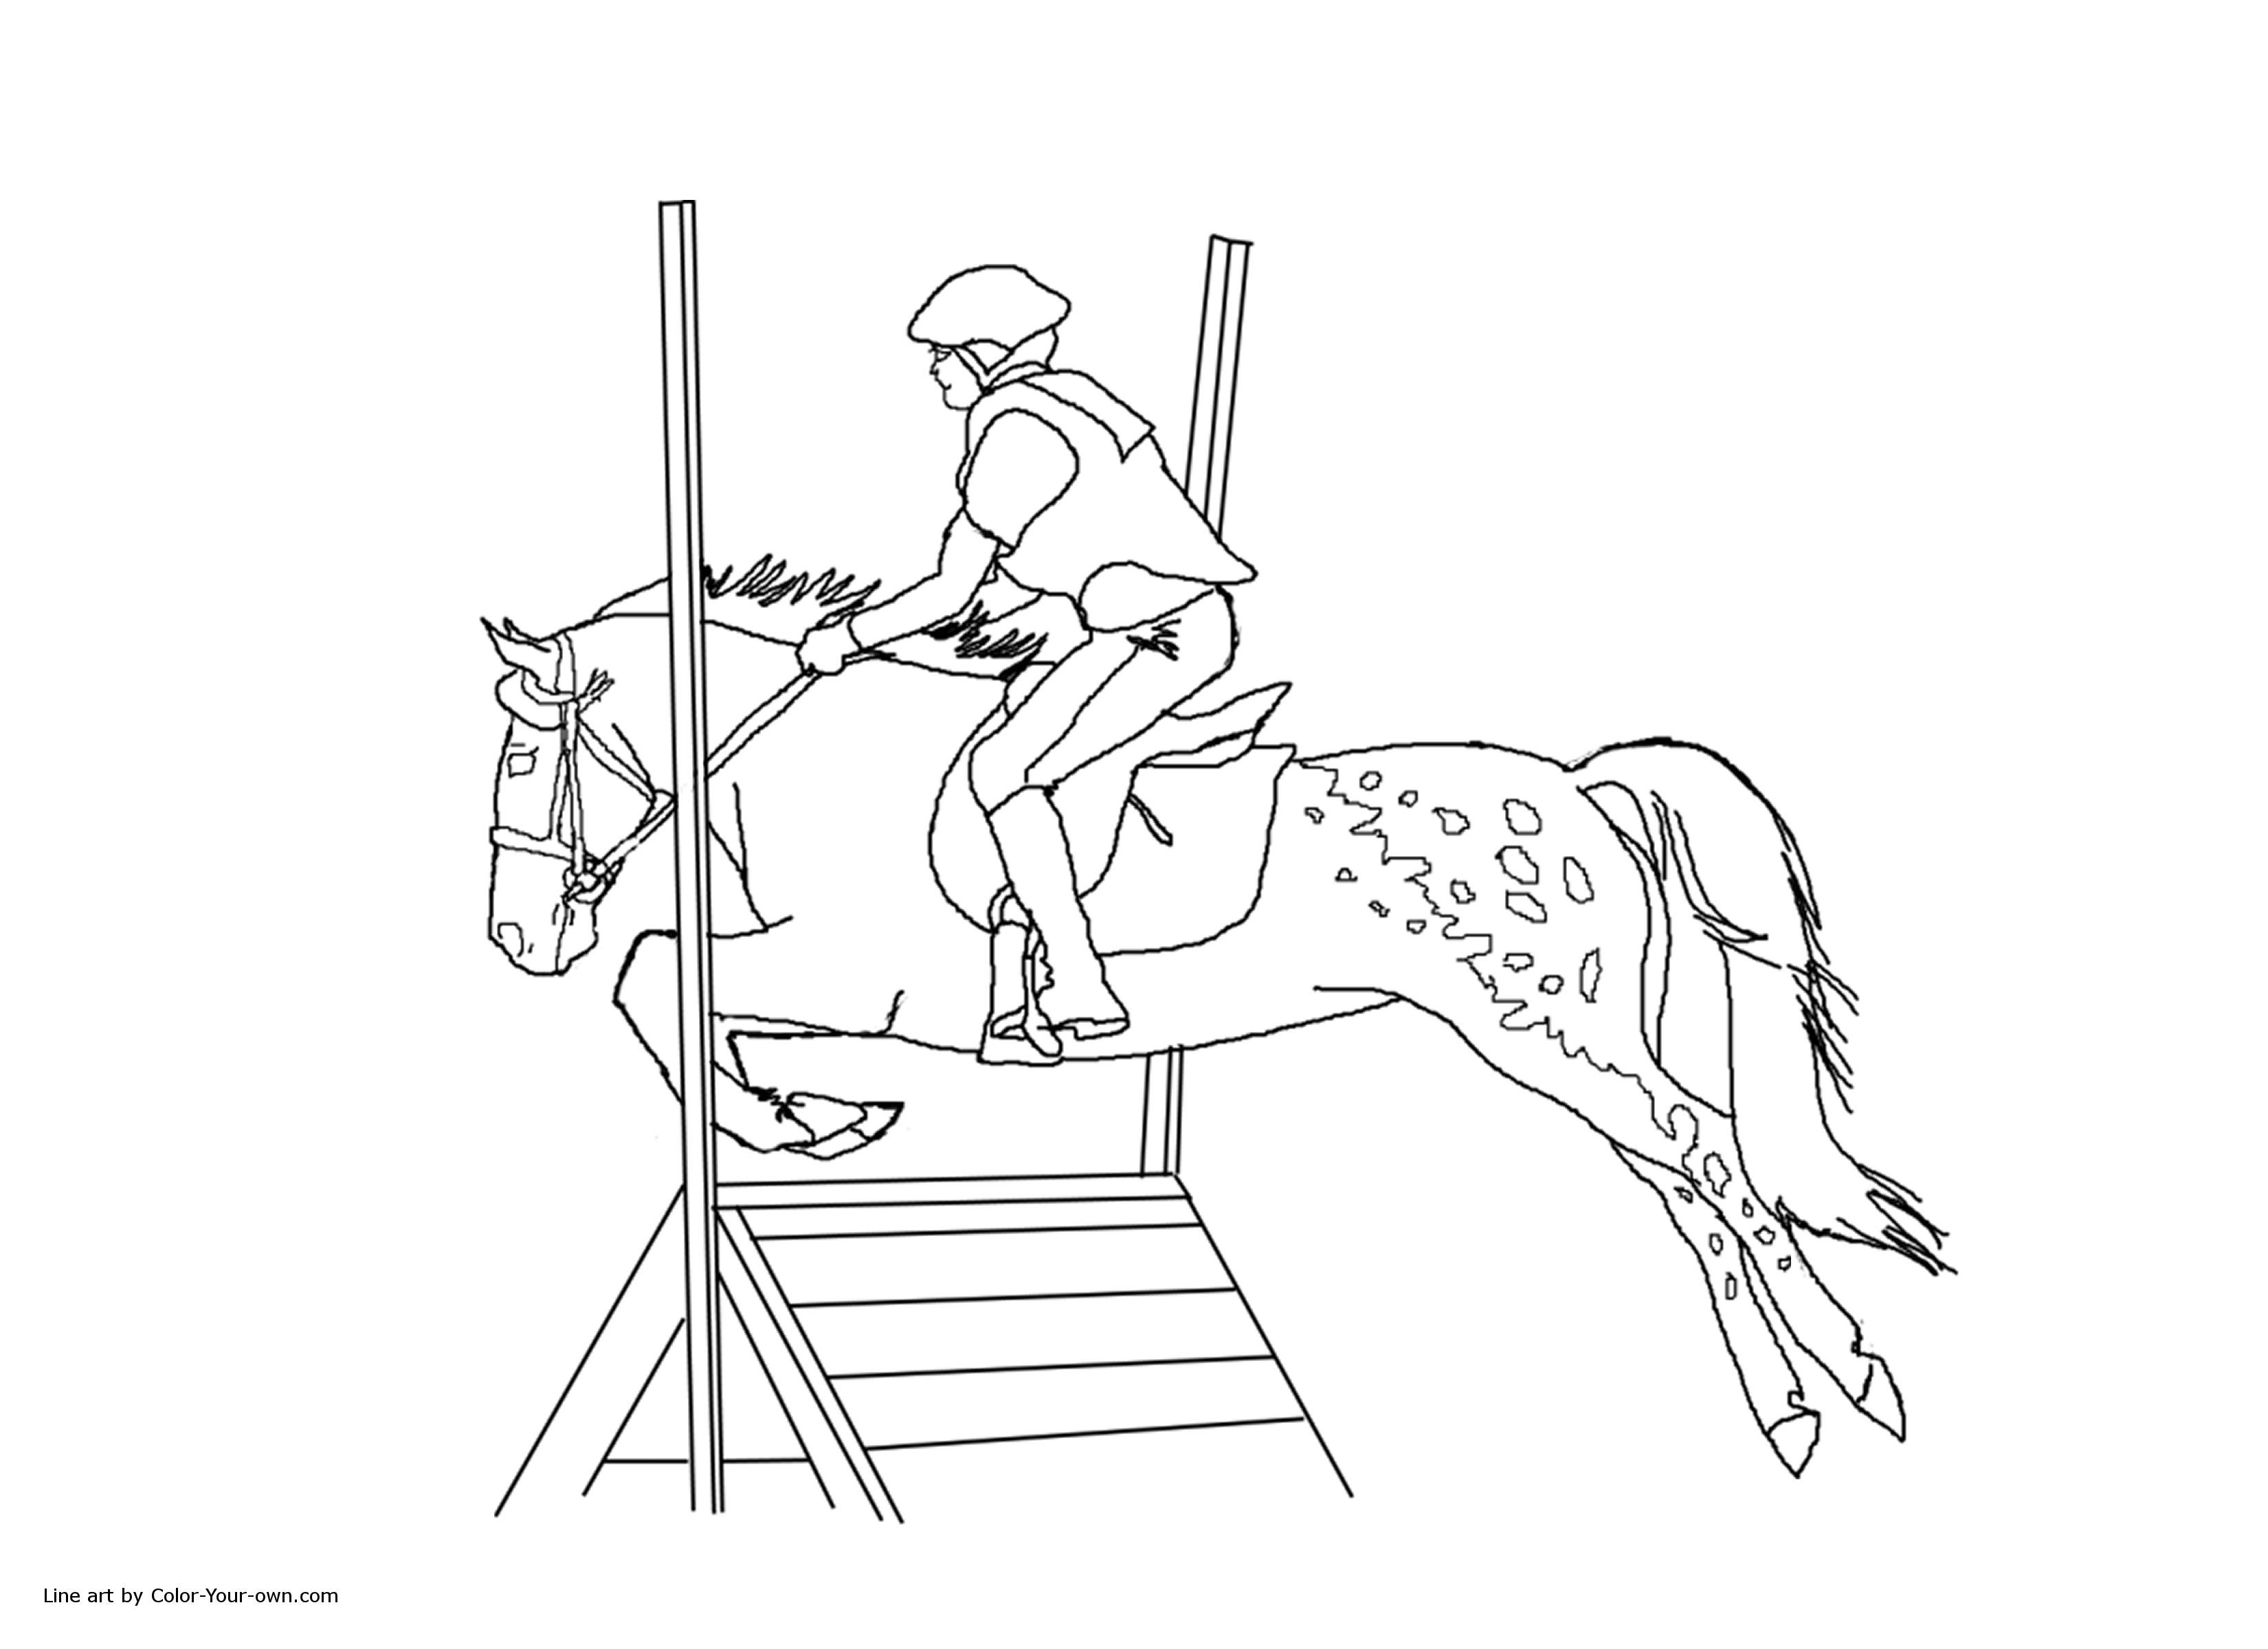 Horse Appy Cross Pony Jumping Coloring Pages Free Printable For ...